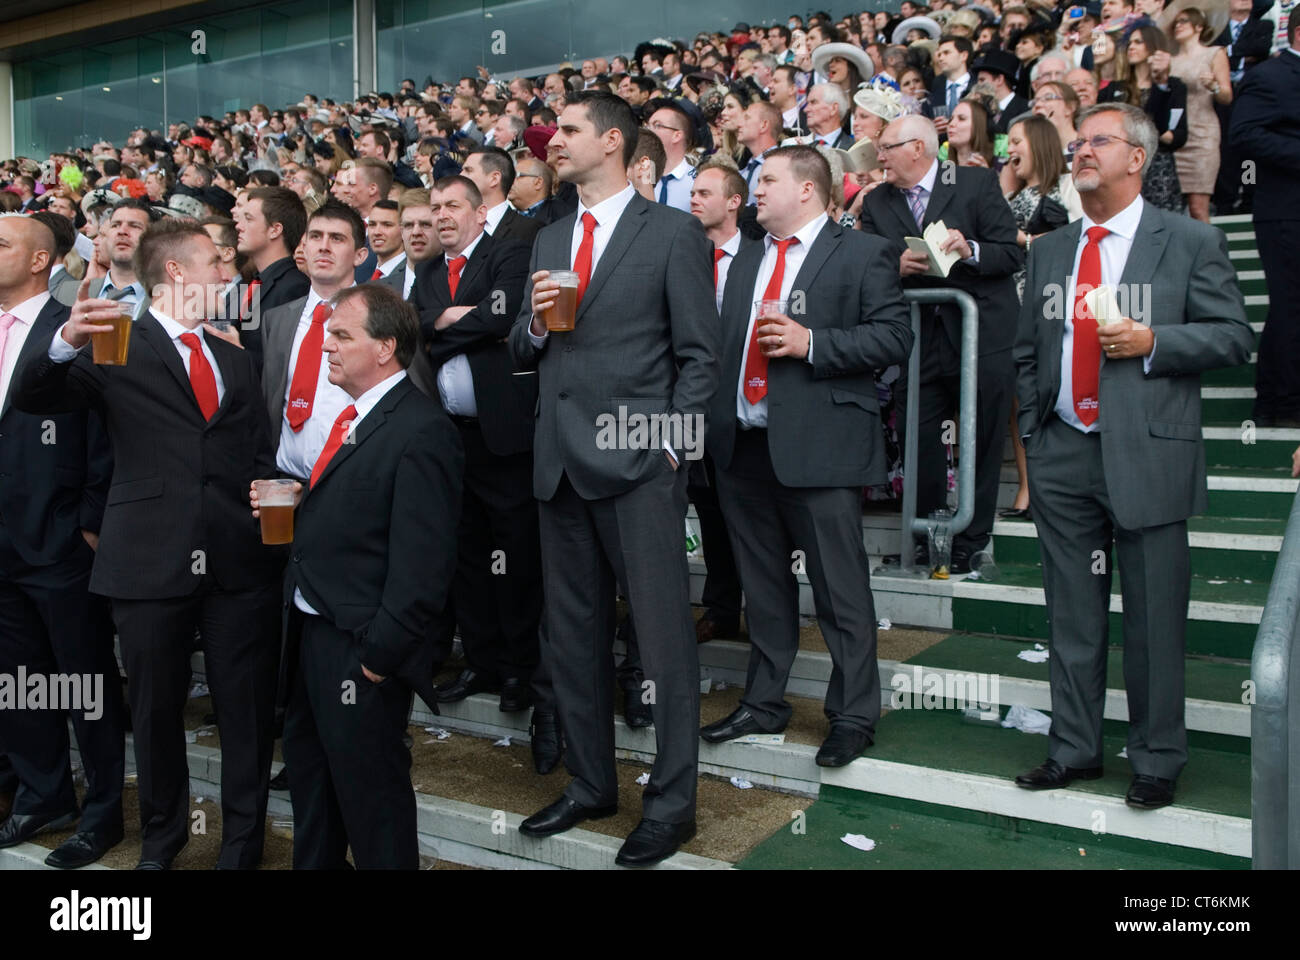 Stag party group of men, all wearing red ties.Royal Ascot horse racing Berkshire. 2012 2010s HOMER SYKES Stock Photo